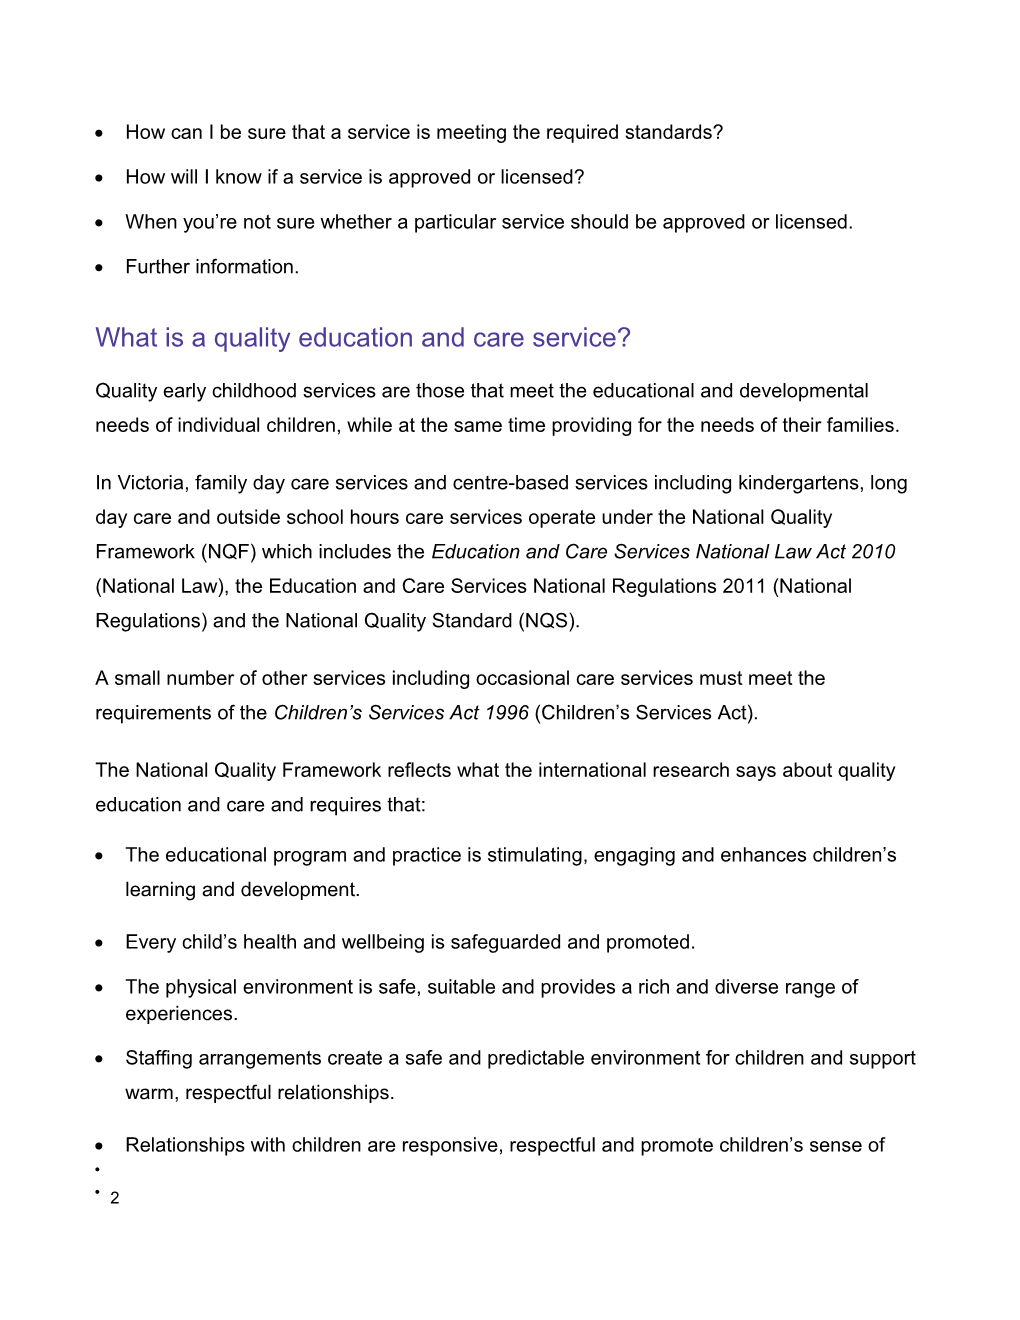 Choosing a Quality Education and Care Service: Information for Families